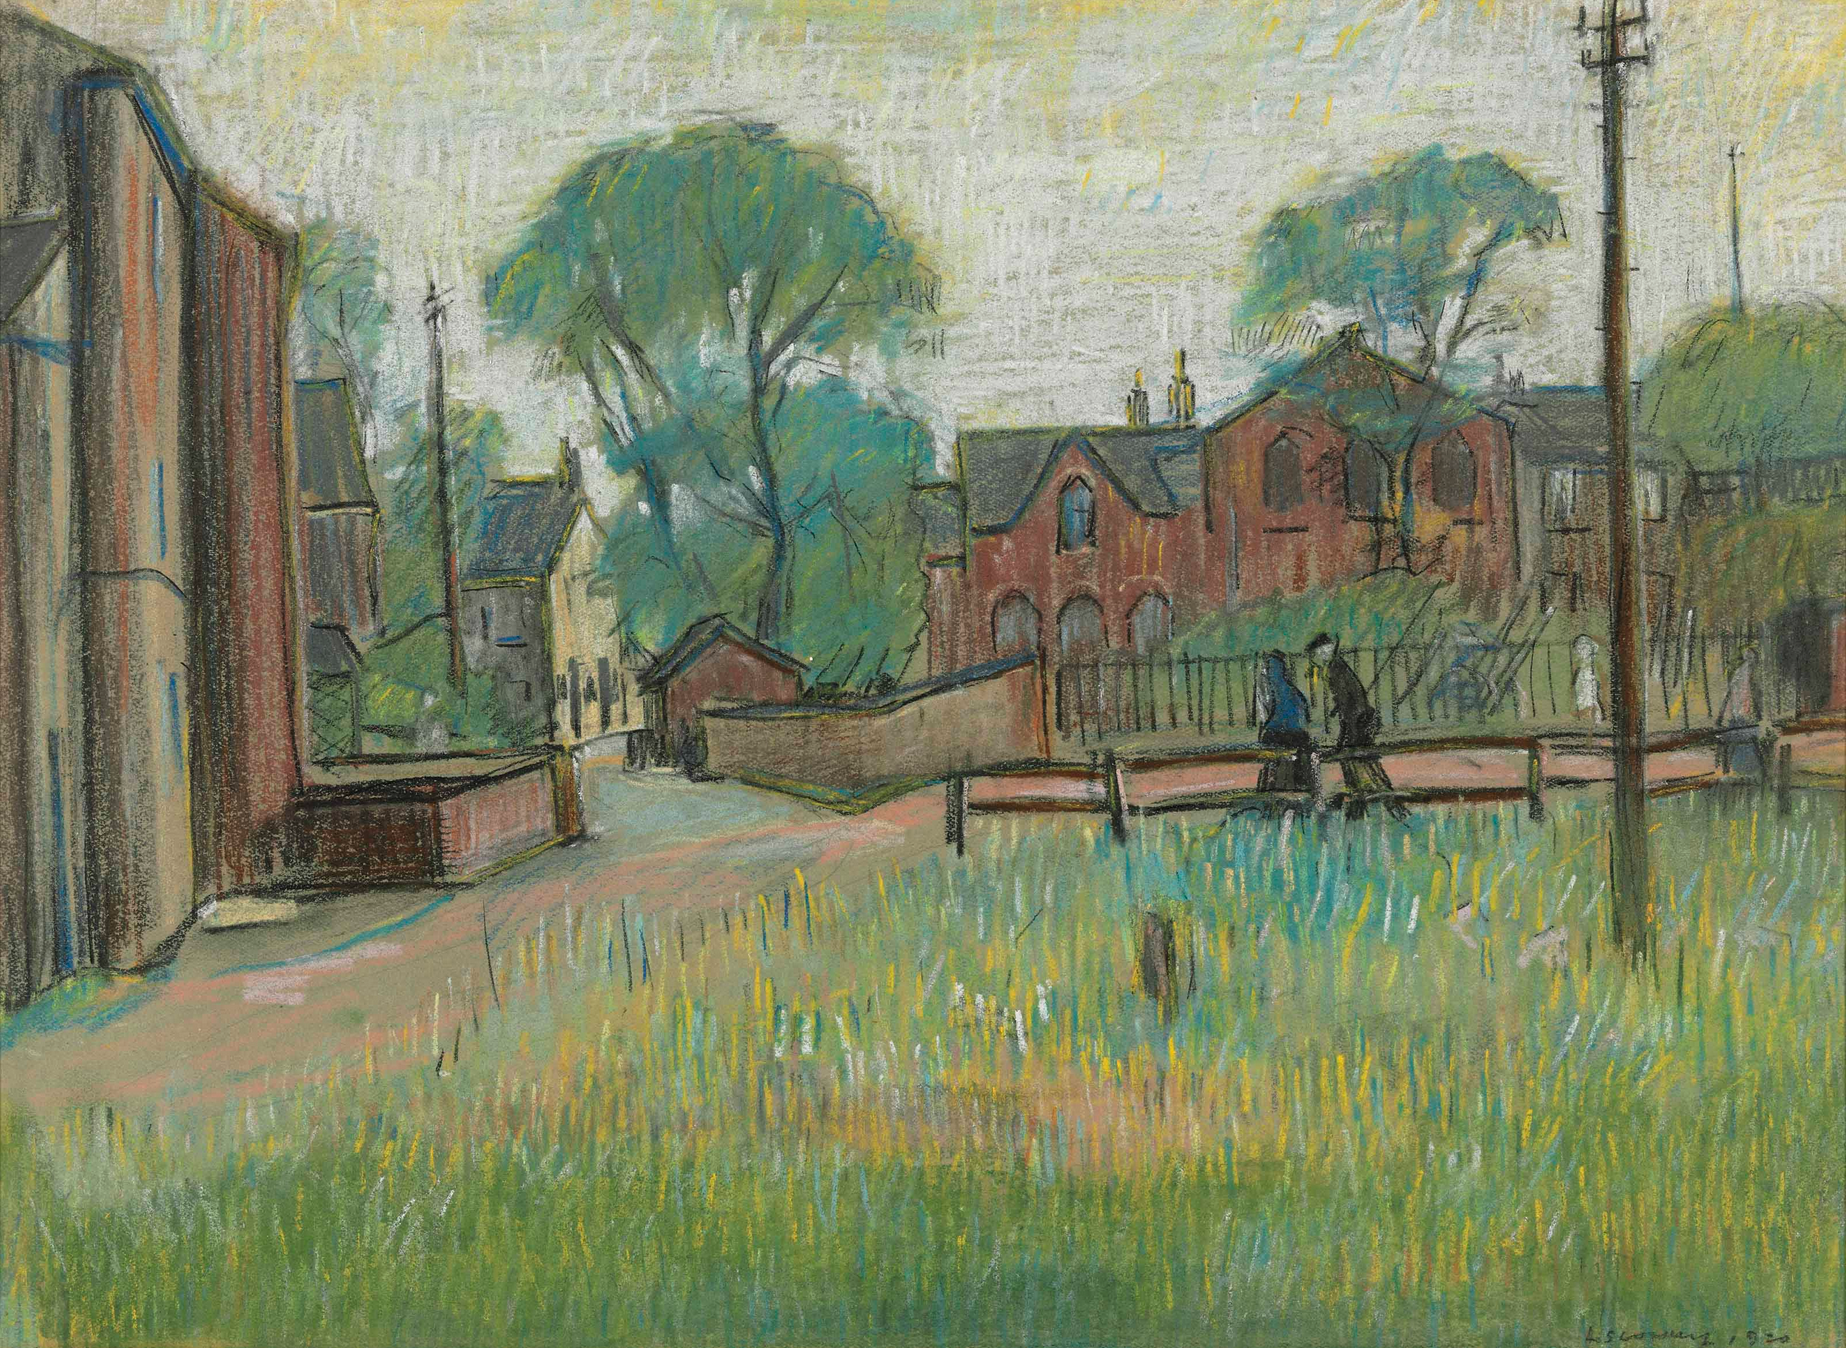 Worsley, South-East Lancashire (1920) by Laurence Stephen Lowry (1887 - 1976), English artist.